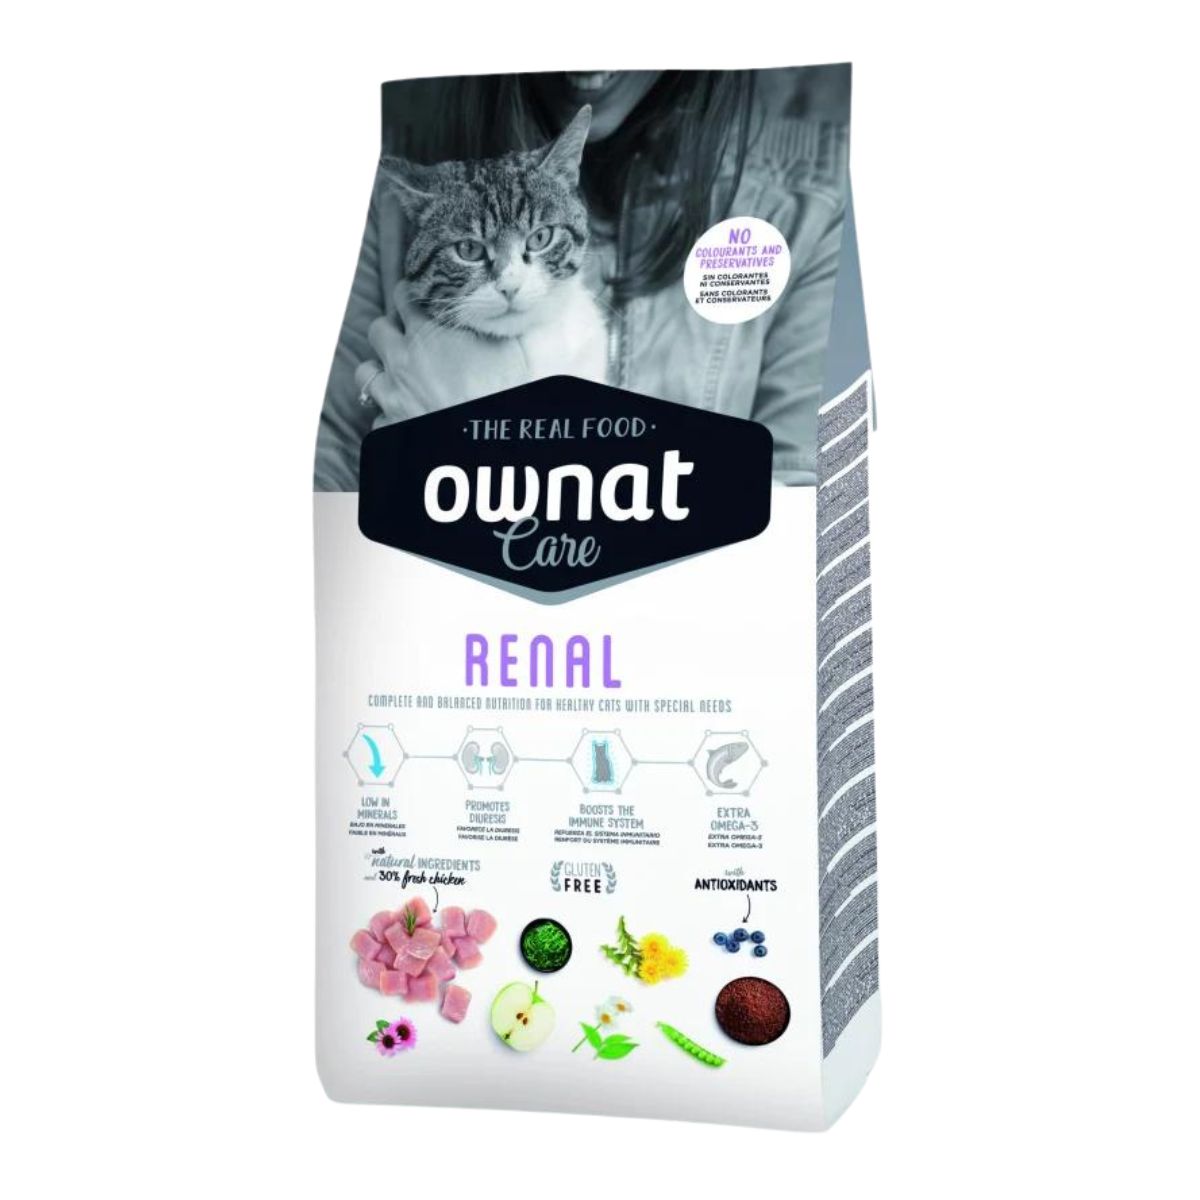 Ownat chat Care RENTAL